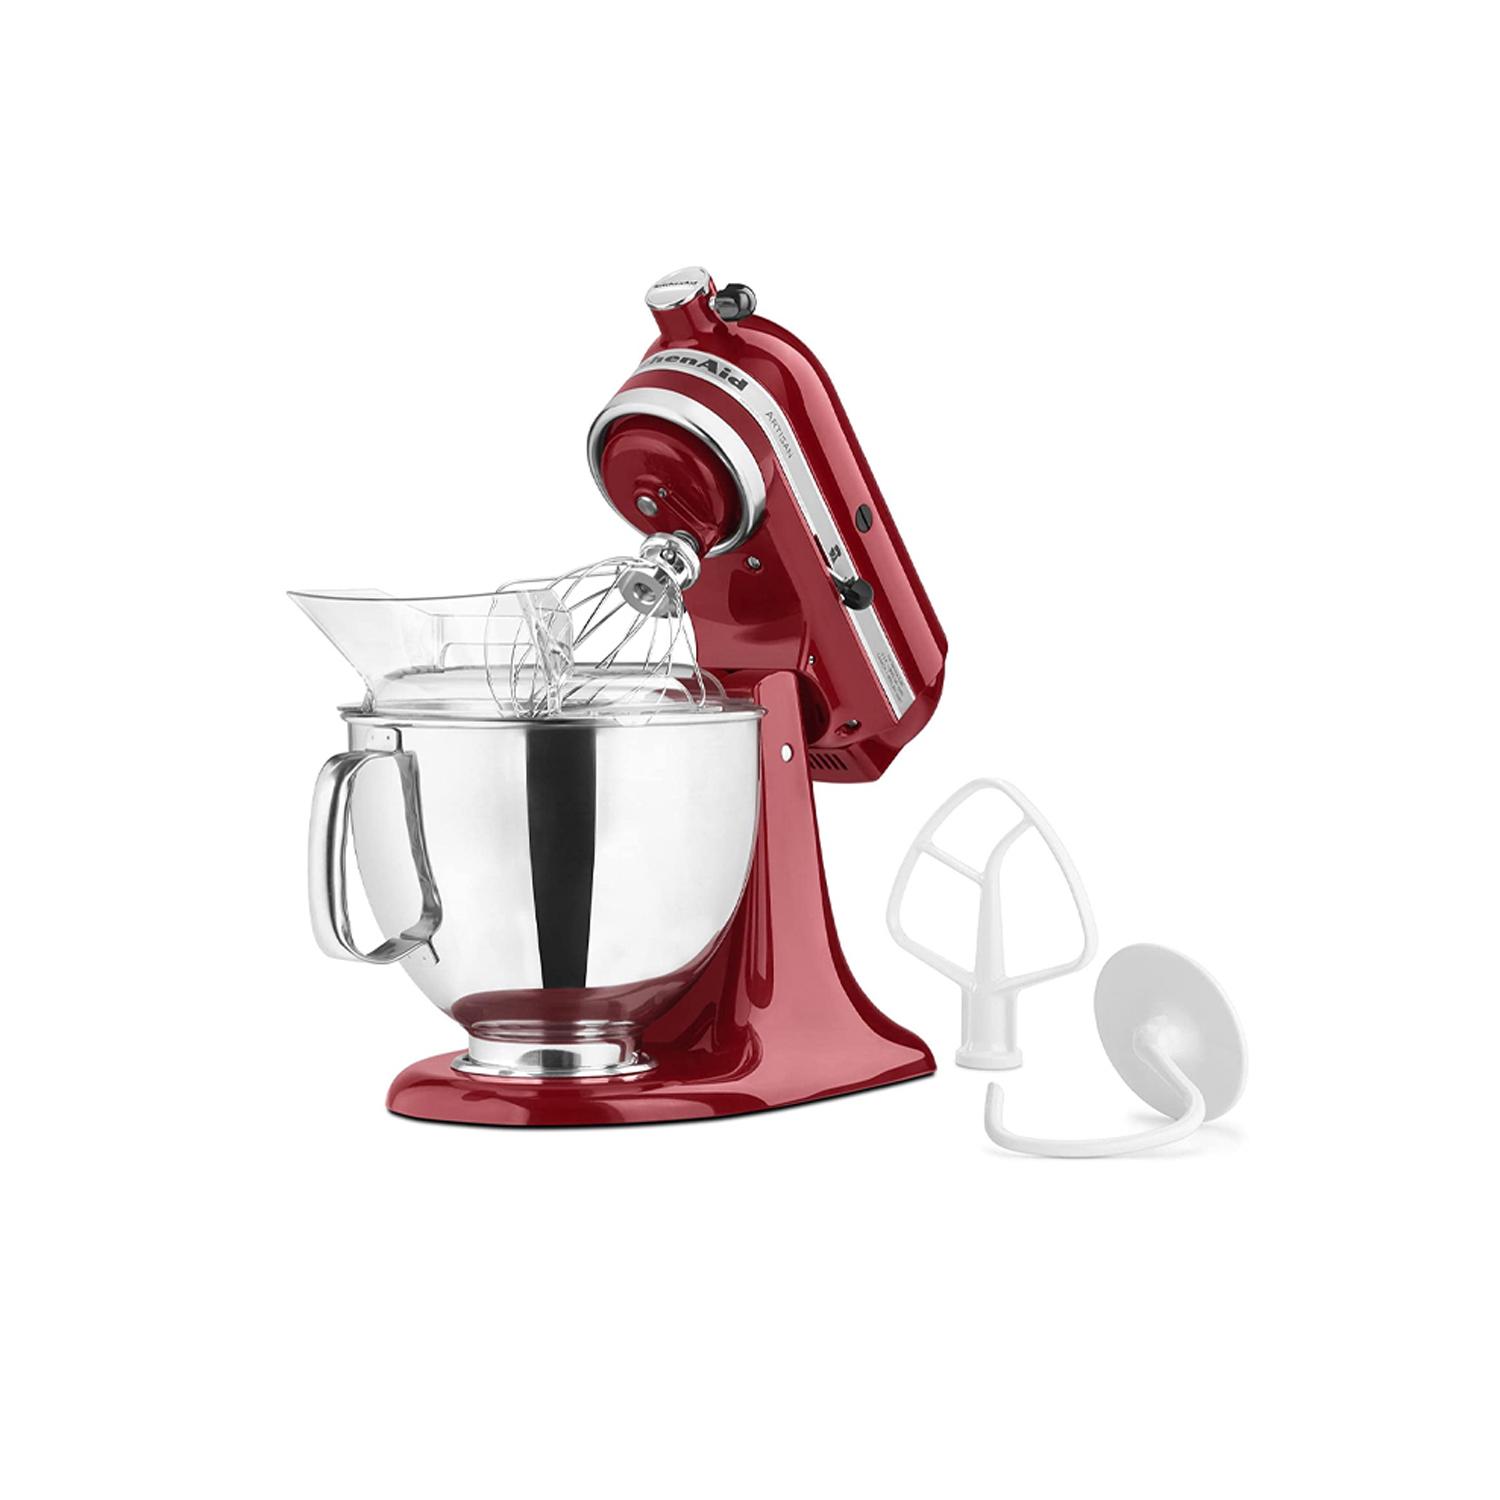 KITCHENAID STAND MIXER WITH POURING SHIELD 5 QUART EMPIRE RED